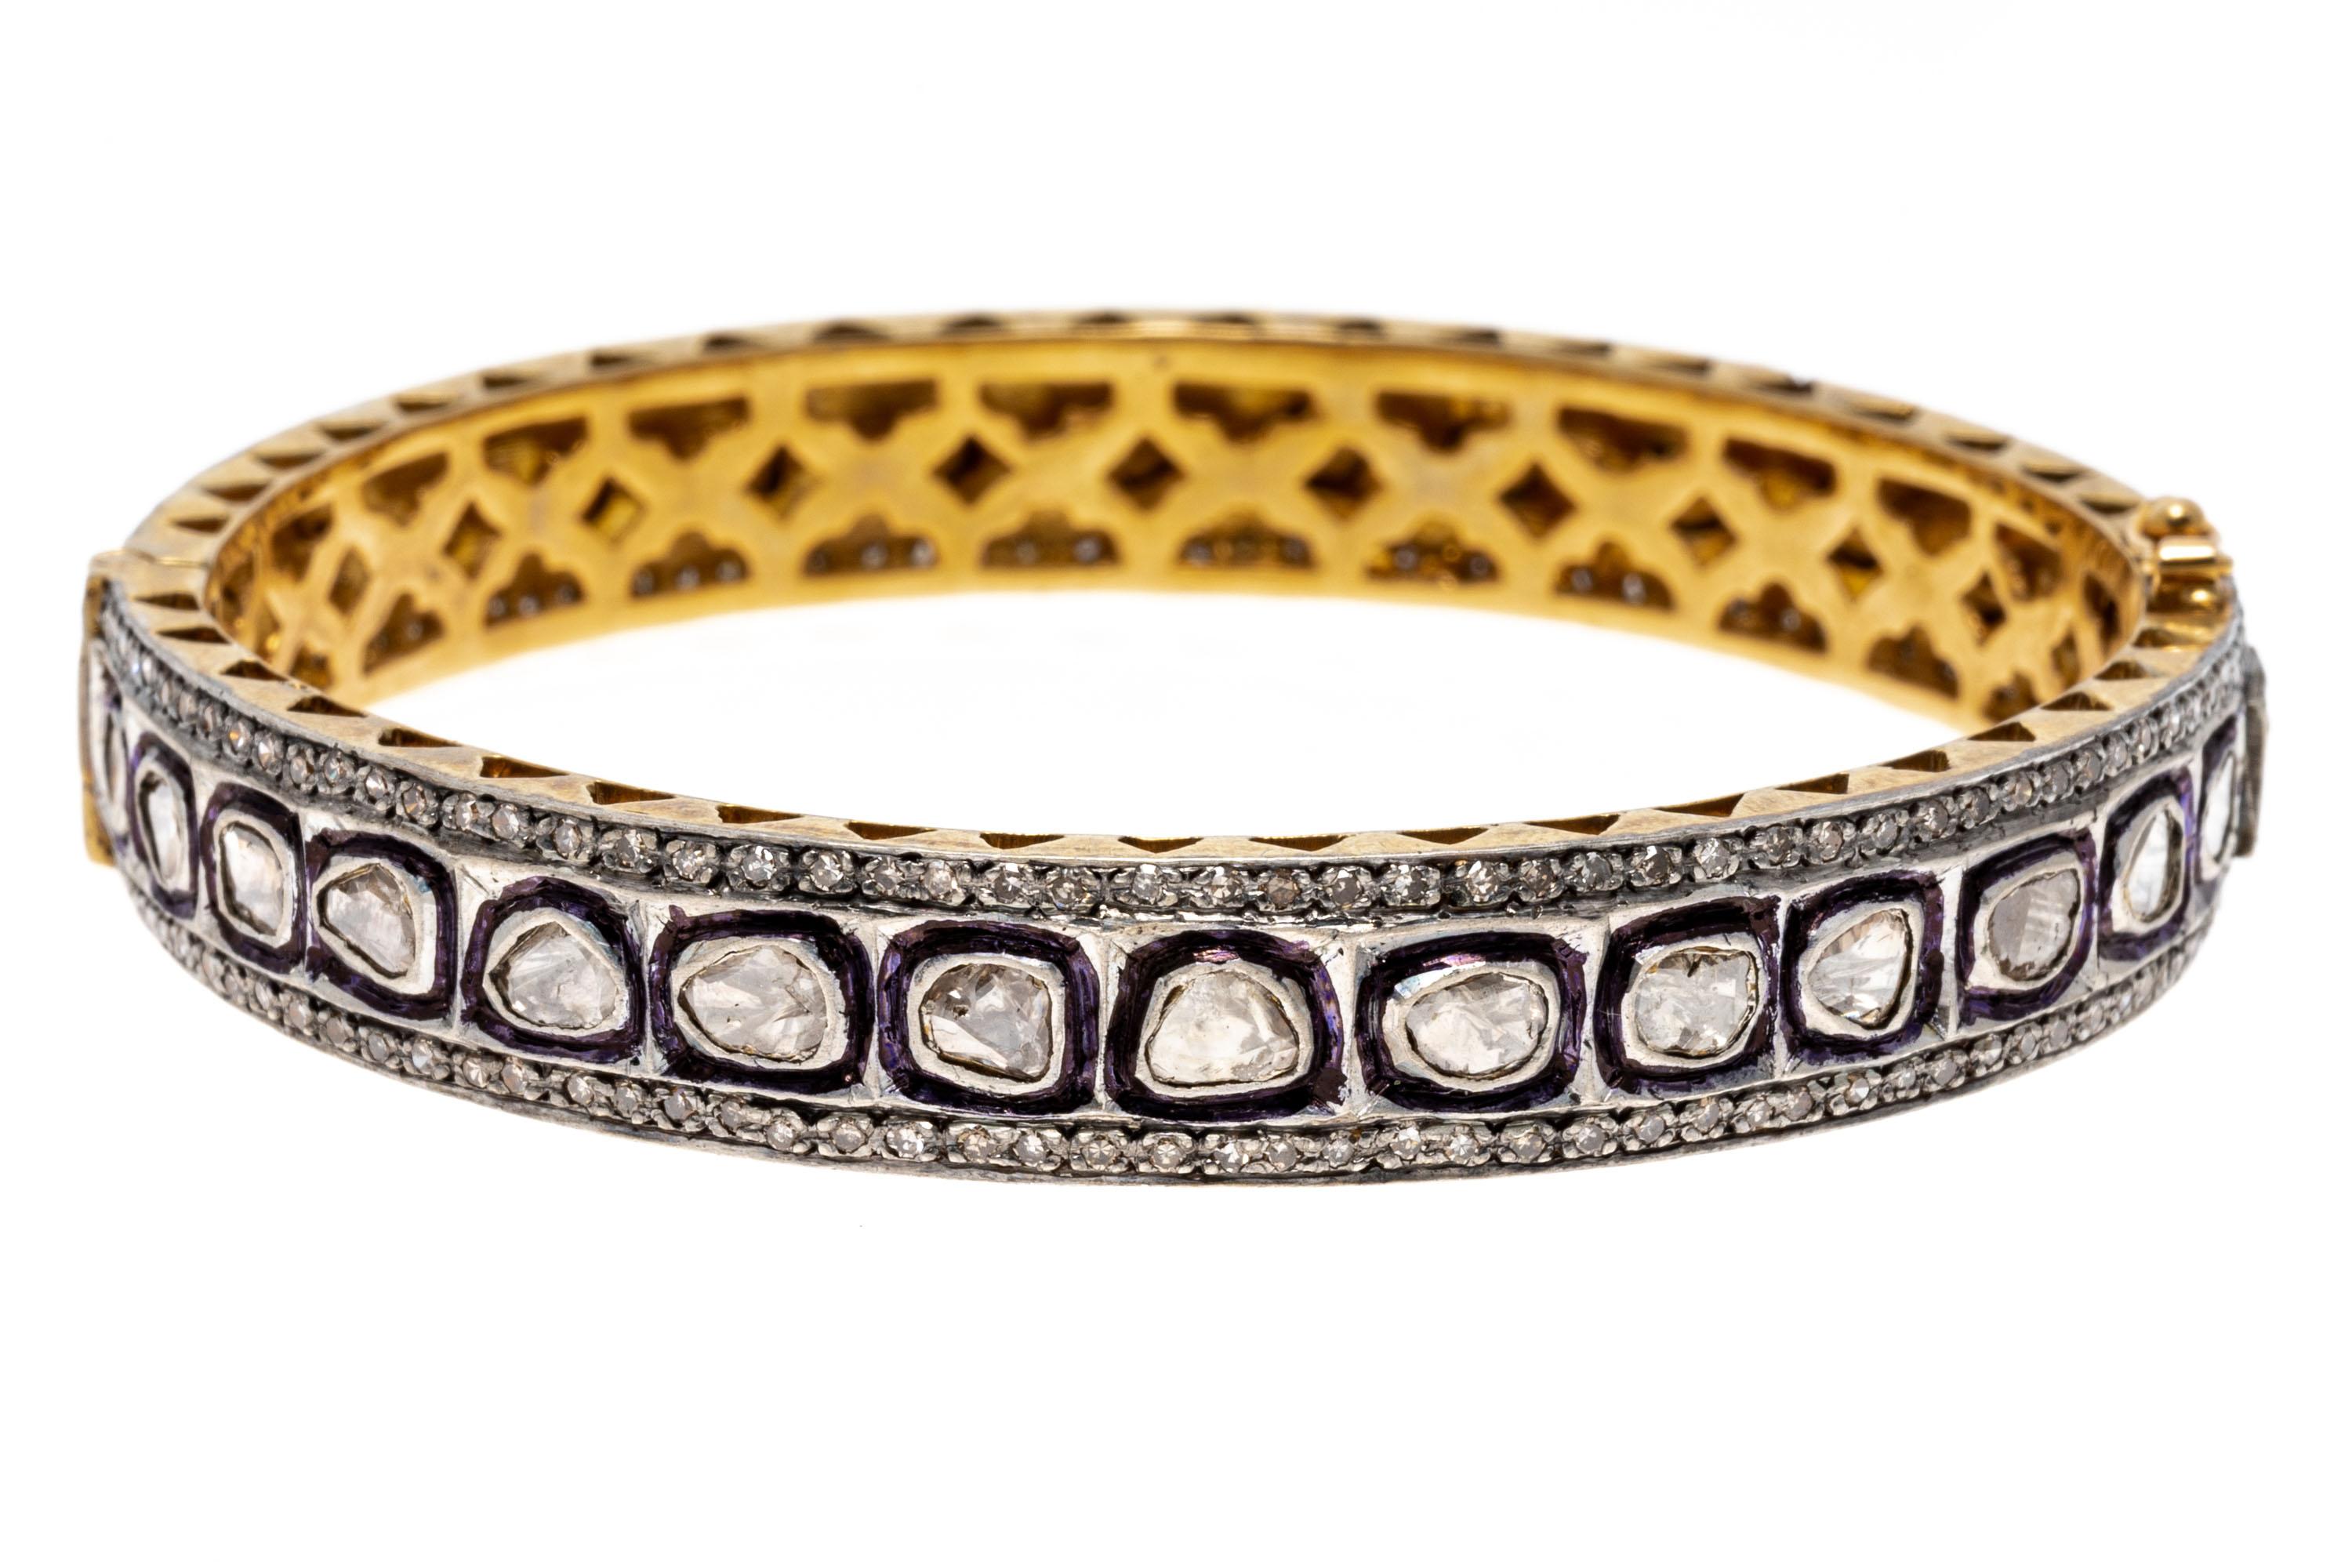 Sterling silver vermeil bracelet. This magnificent bracelet is a hinged bangle style, decorated in the center row with macle cut diamonds, bezel set. Framing the center on either side is a row of round faceted diamonds, approximately 0.55 TCW. The